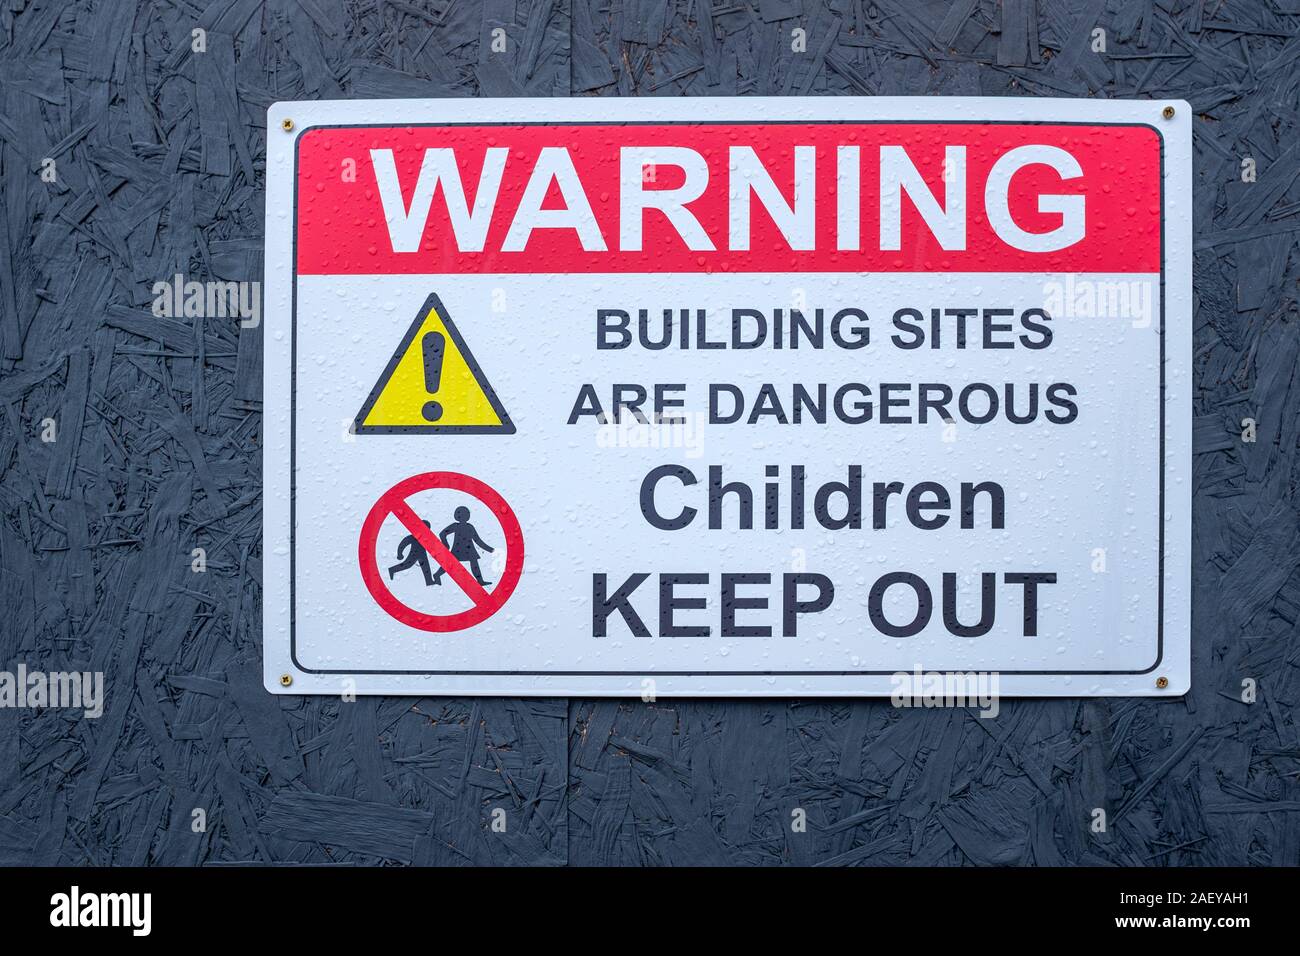 Building sites are dangerous, Children keep out warning sign UK Stock Photo